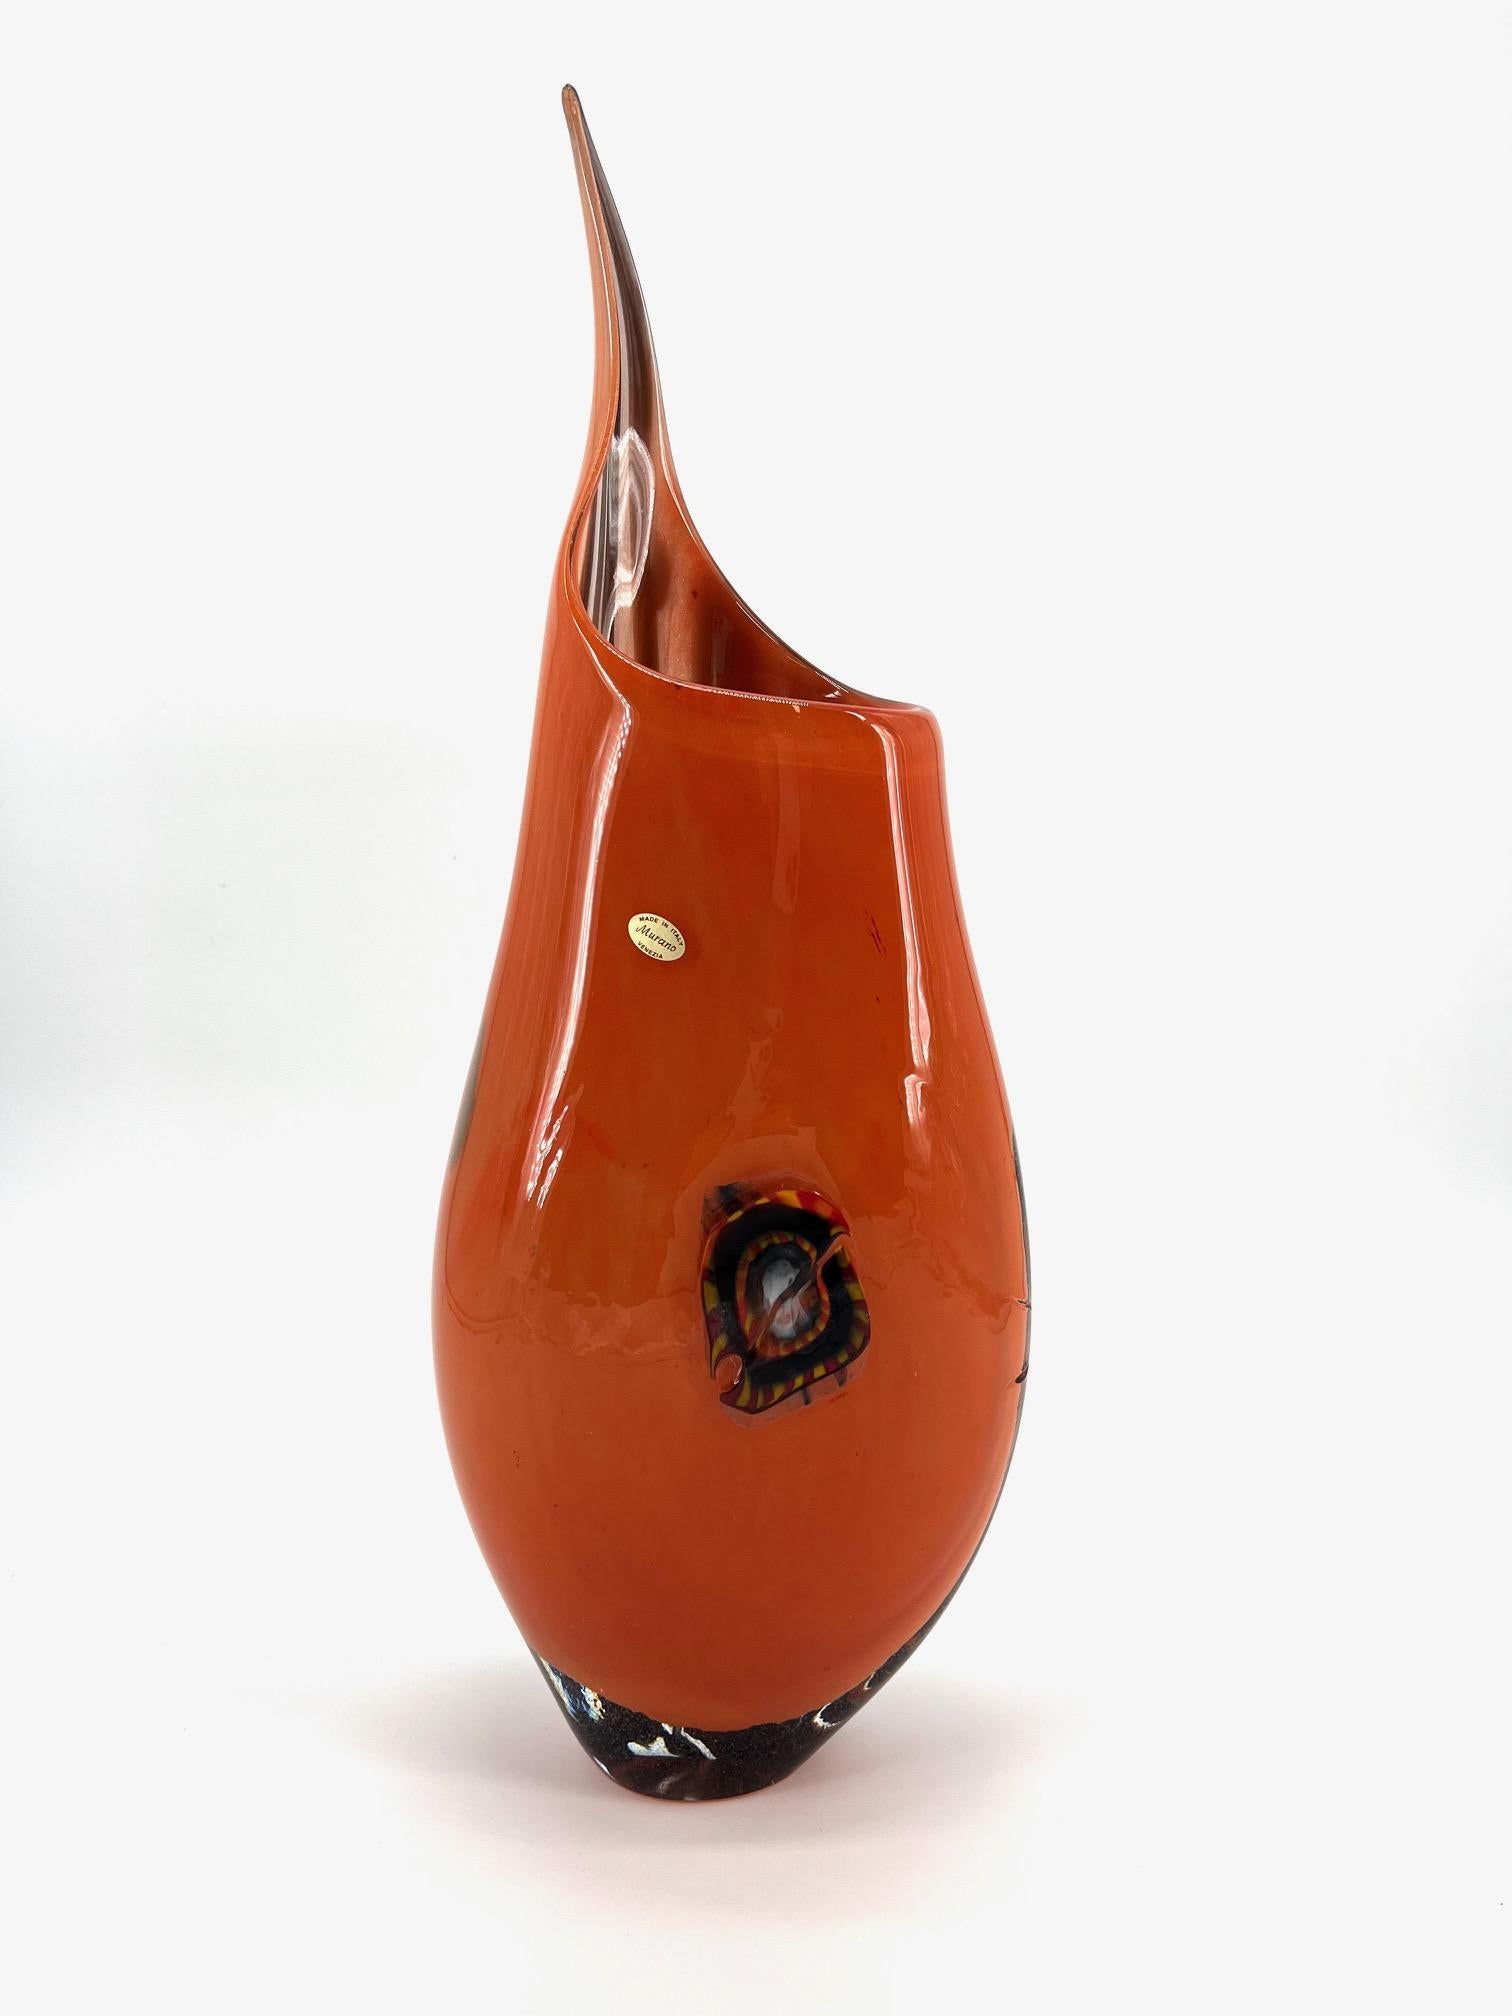 Our aim is the emotion through the creation of Murano glass artpieces.
 
This art-vase is hand made in our Murano workshop, our Master blowns a beautiful orange nouance glasses and decored with a black blown glass texture on the first side of this